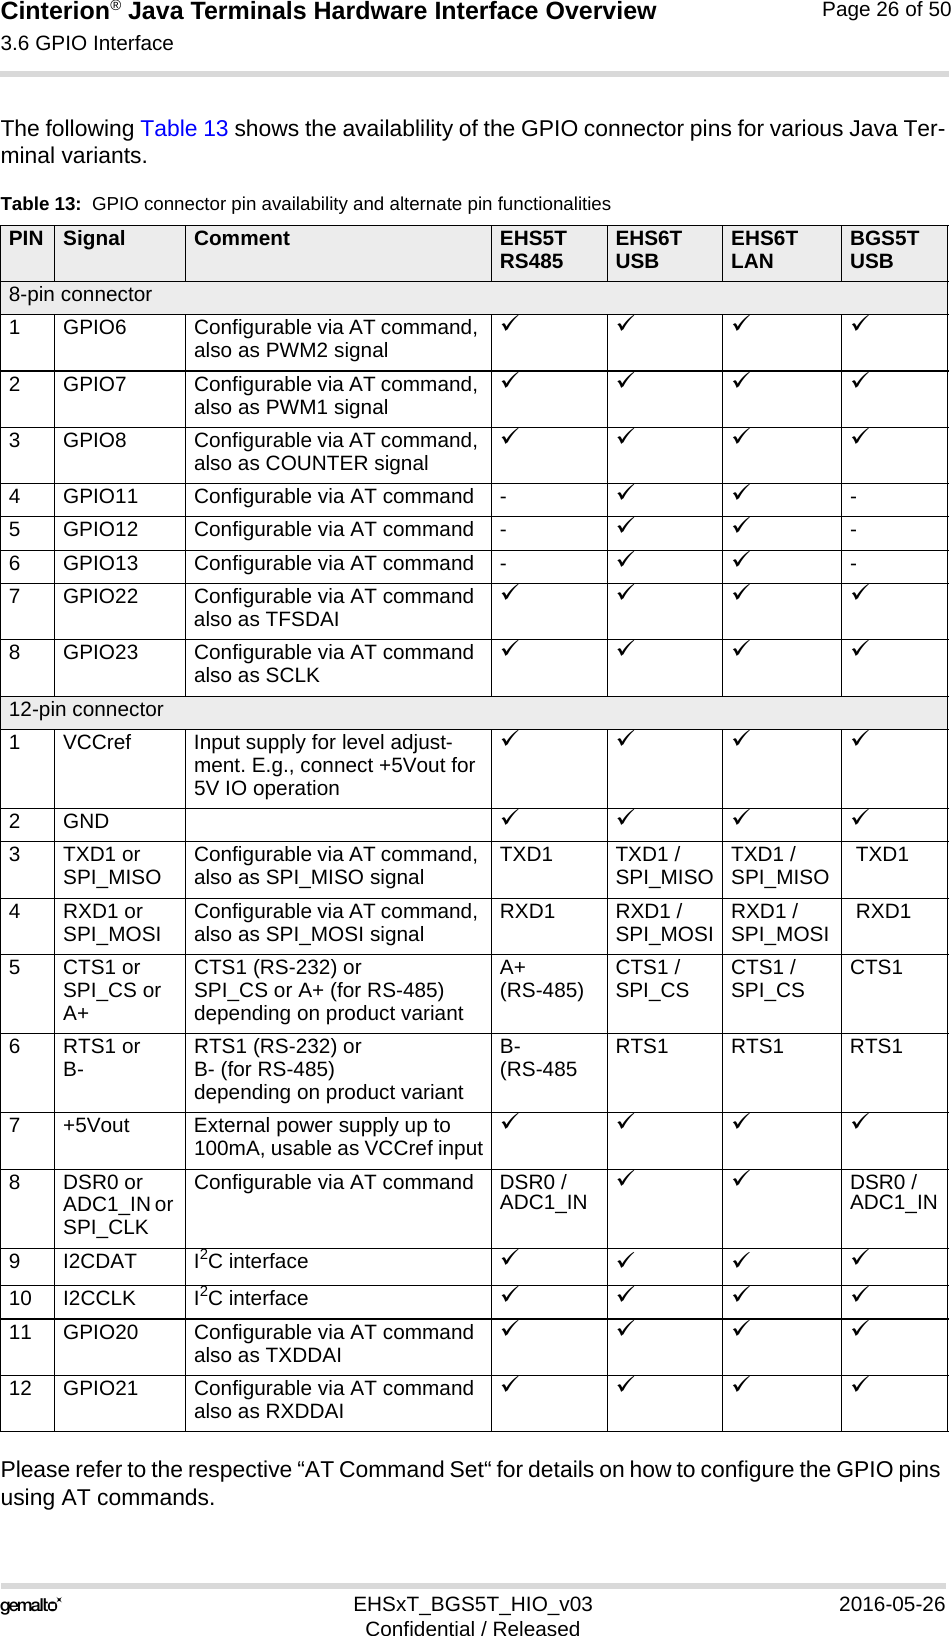 Cinterion® Java Terminals Hardware Interface Overview3.6 GPIO Interface39EHSxT_BGS5T_HIO_v03 2016-05-26Confidential / ReleasedPage 26 of 50The following Table 13 shows the availablility of the GPIO connector pins for various Java Ter-minal variants. Please refer to the respective “AT Command Set“ for details on how to configure the GPIO pins using AT commands.Table 13:  GPIO connector pin availability and alternate pin functionalitiesPIN Signal Comment EHS5T RS485 EHS6T USB EHS6T LAN BGS5T USB8-pin connector1 GPIO6 Configurable via AT command, also as PWM2 signal 2 GPIO7 Configurable via AT command, also as PWM1 signal 3 GPIO8 Configurable via AT command, also as COUNTER signal 4 GPIO11 Configurable via AT command -  -5 GPIO12 Configurable via AT command -  -6 GPIO13 Configurable via AT command -  -7 GPIO22 Configurable via AT command also as TFSDAI 8 GPIO23 Configurable via AT command also as SCLK 12-pin connector1 VCCref Input supply for level adjust-ment. E.g., connect +5Vout for 5V IO operation 2GND  3TXD1 orSPI_MISO Configurable via AT command, also as SPI_MISO signal TXD1 TXD1 /SPI_MISO TXD1 /SPI_MISO  TXD14 RXD1 orSPI_MOSI Configurable via AT command, also as SPI_MOSI signal RXD1 RXD1 /SPI_MOSI RXD1 /SPI_MOSI  RXD15CTS1 orSPI_CS orA+CTS1 (RS-232) or SPI_CS or A+ (for RS-485) depending on product variantA+(RS-485) CTS1 /SPI_CS CTS1 /SPI_CS CTS1 6RTS1 orB- RTS1 (RS-232) or B- (for RS-485) depending on product variantB-(RS-485 RTS1 RTS1 RTS17 +5Vout External power supply up to 100mA, usable as VCCref input 8 DSR0 or ADC1_IN or SPI_CLKConfigurable via AT command DSR0 /ADC1_IN DSR0 /ADC1_IN9 I2CDAT I2C interface    10 I2CCLK I2C interface  11 GPIO20 Configurable via AT command also as TXDDAI 12 GPIO21 Configurable via AT command also as RXDDAI 